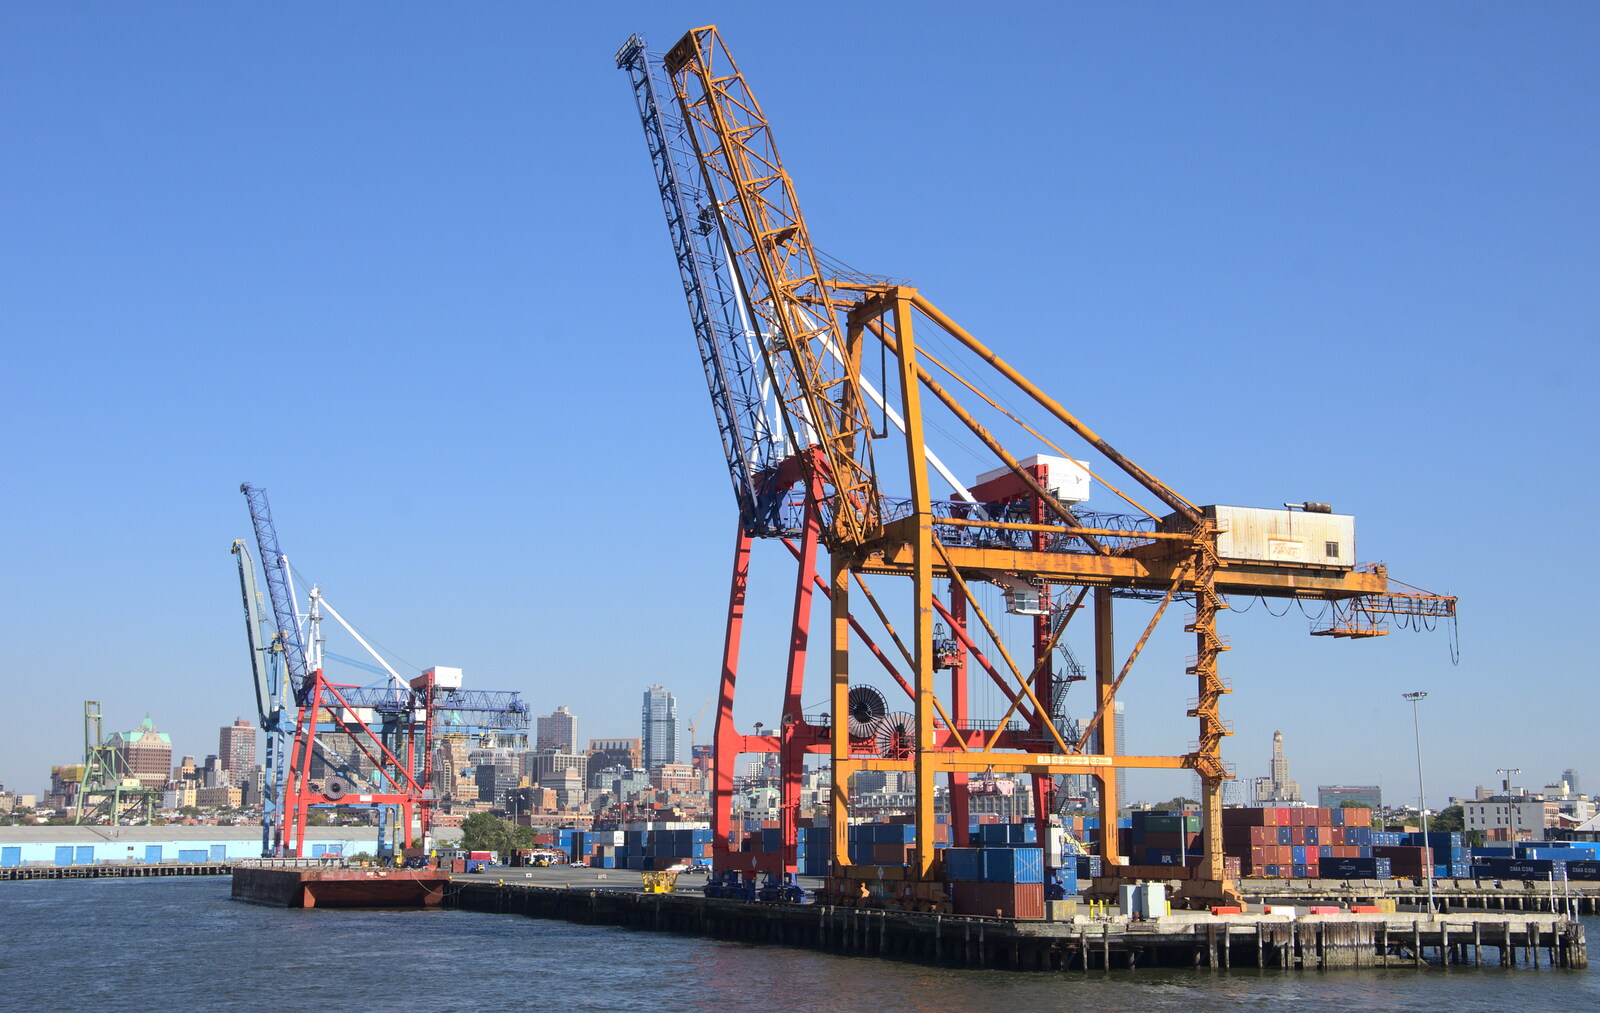 Dockyard cranes from The Liberty Cruise and One World Trade Center, New York, United States - 23rd October 2018